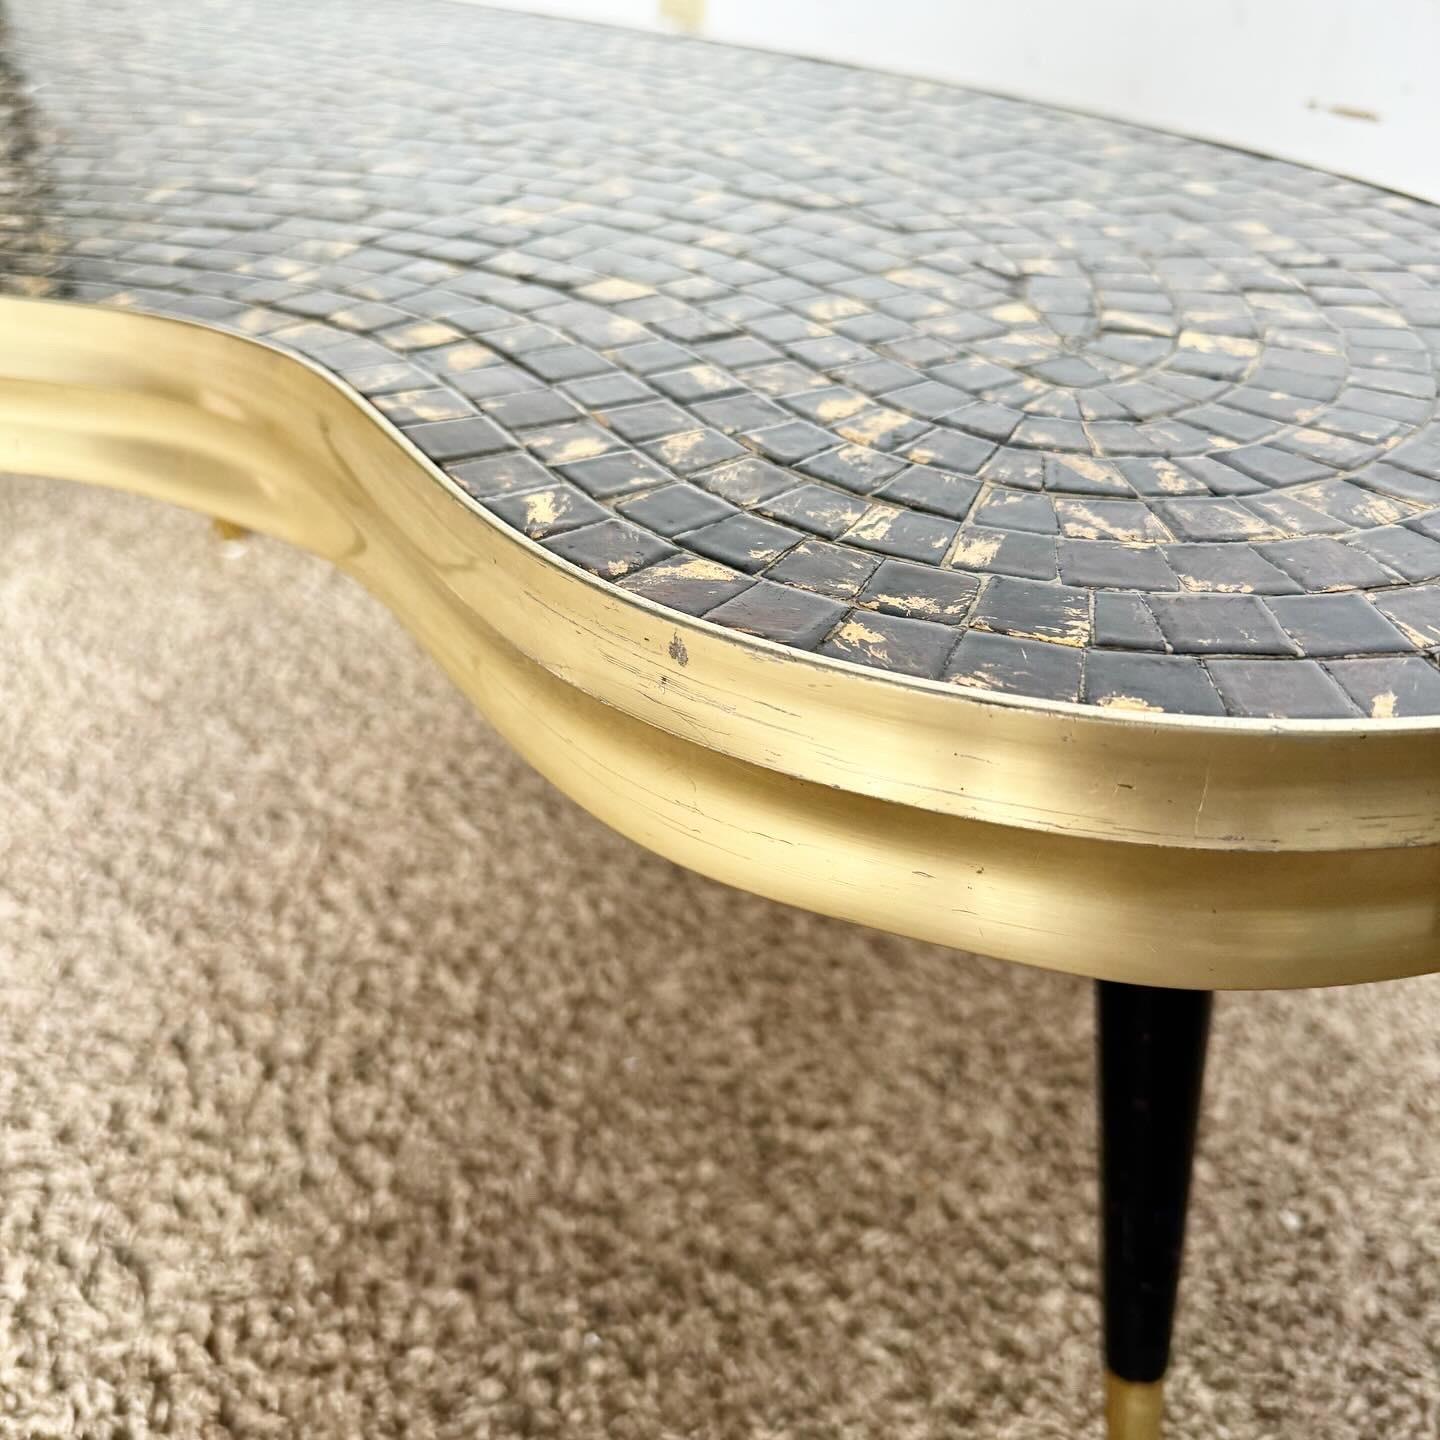 Delve into the elegance of the Mid Century Modern era with this unique Kidney Coffee Table, featuring a stunning mosaic top with black and goldish-brown tiles. Its distinctive kidney shape and three-legged design, accented with black paint and gold